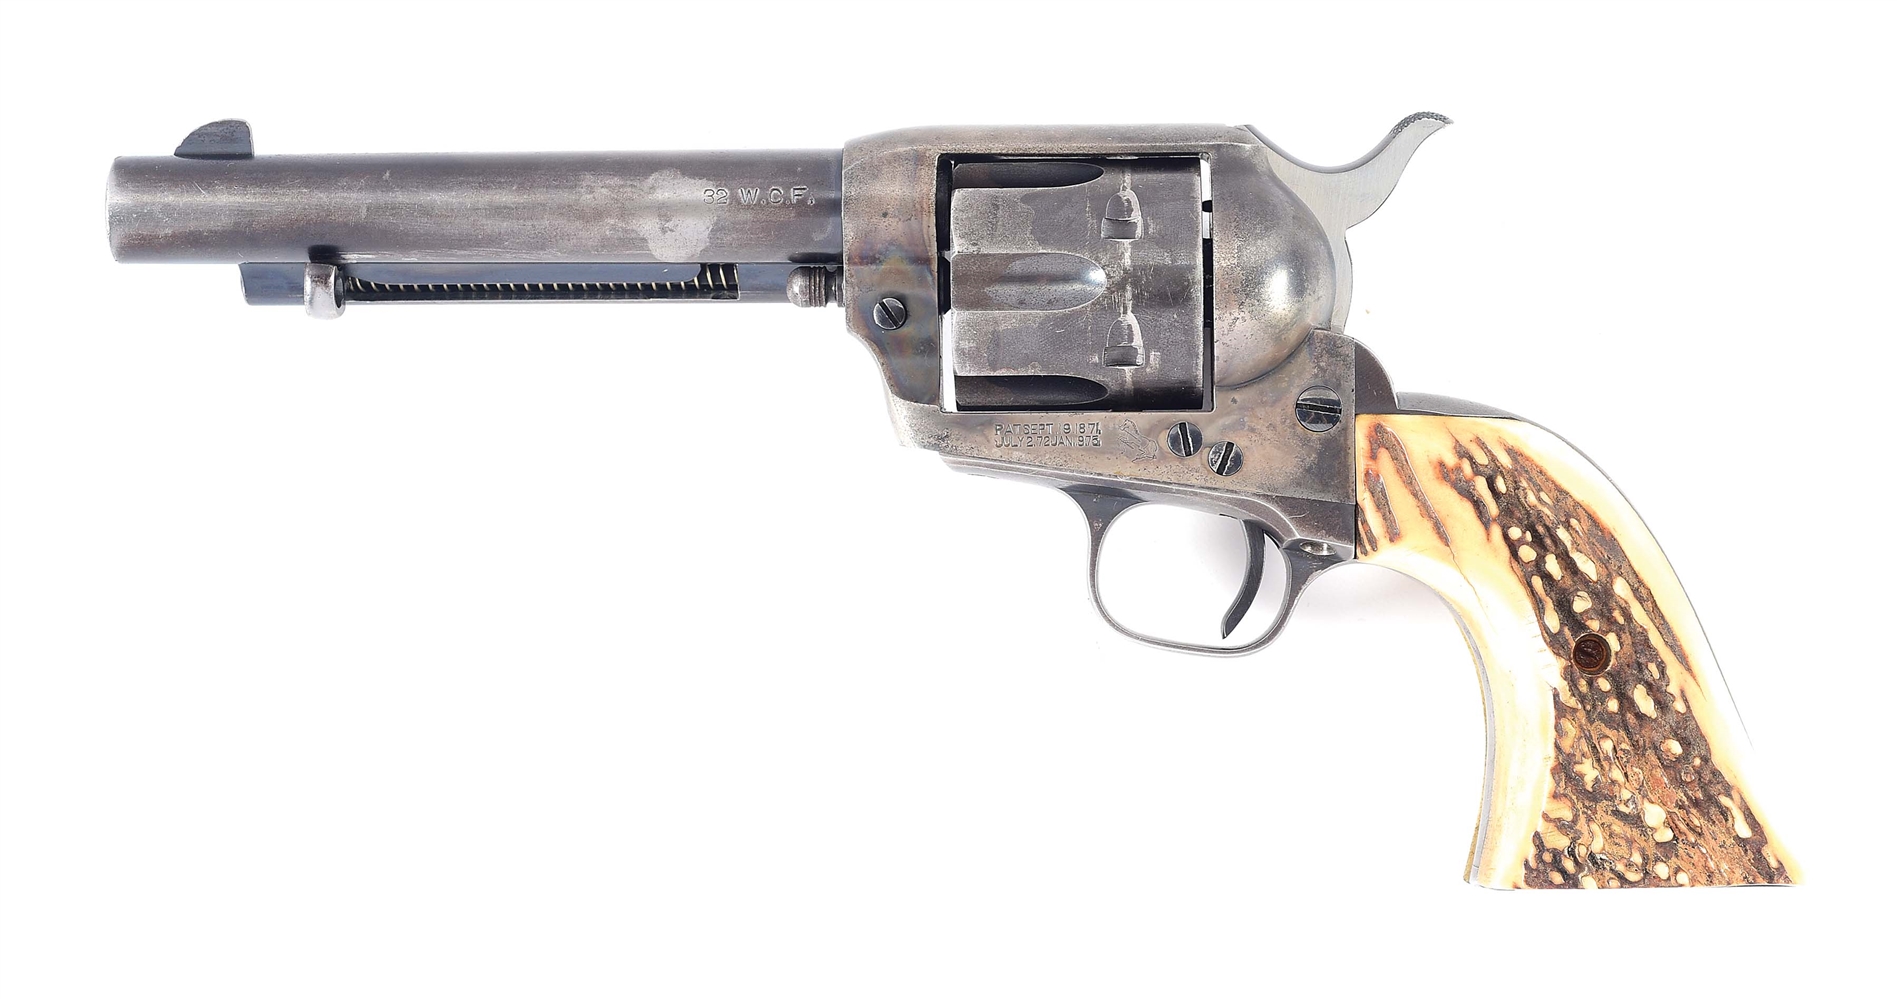 (C) COLT SINGLE ACTION ARMY REVOLVER WITH A FACTORY BLACK BOX.